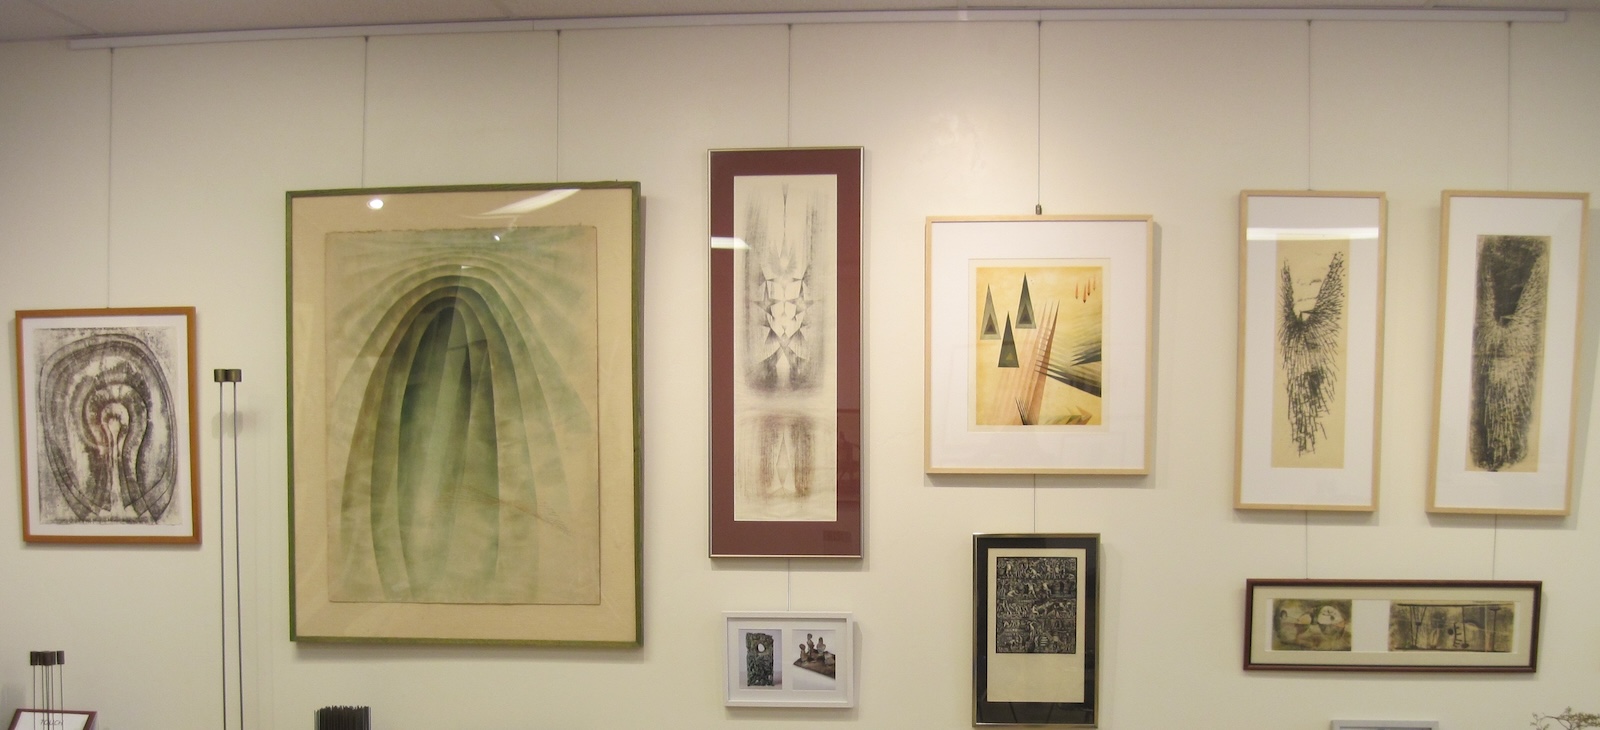 Wide view of paintings and prints by modernist Harry Bertoia hung on picture hanging system